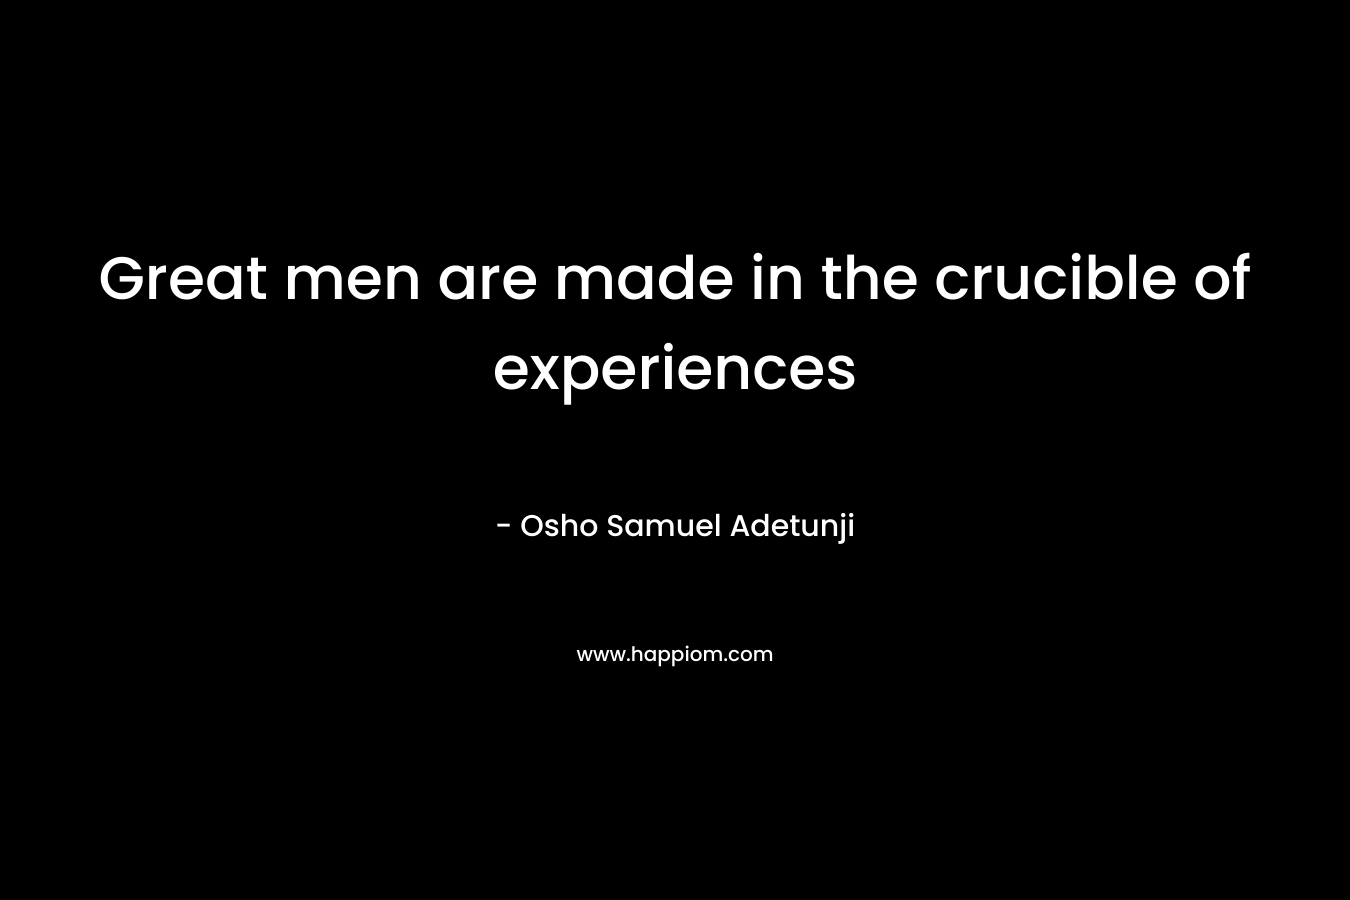 Great men are made in the crucible of experiences